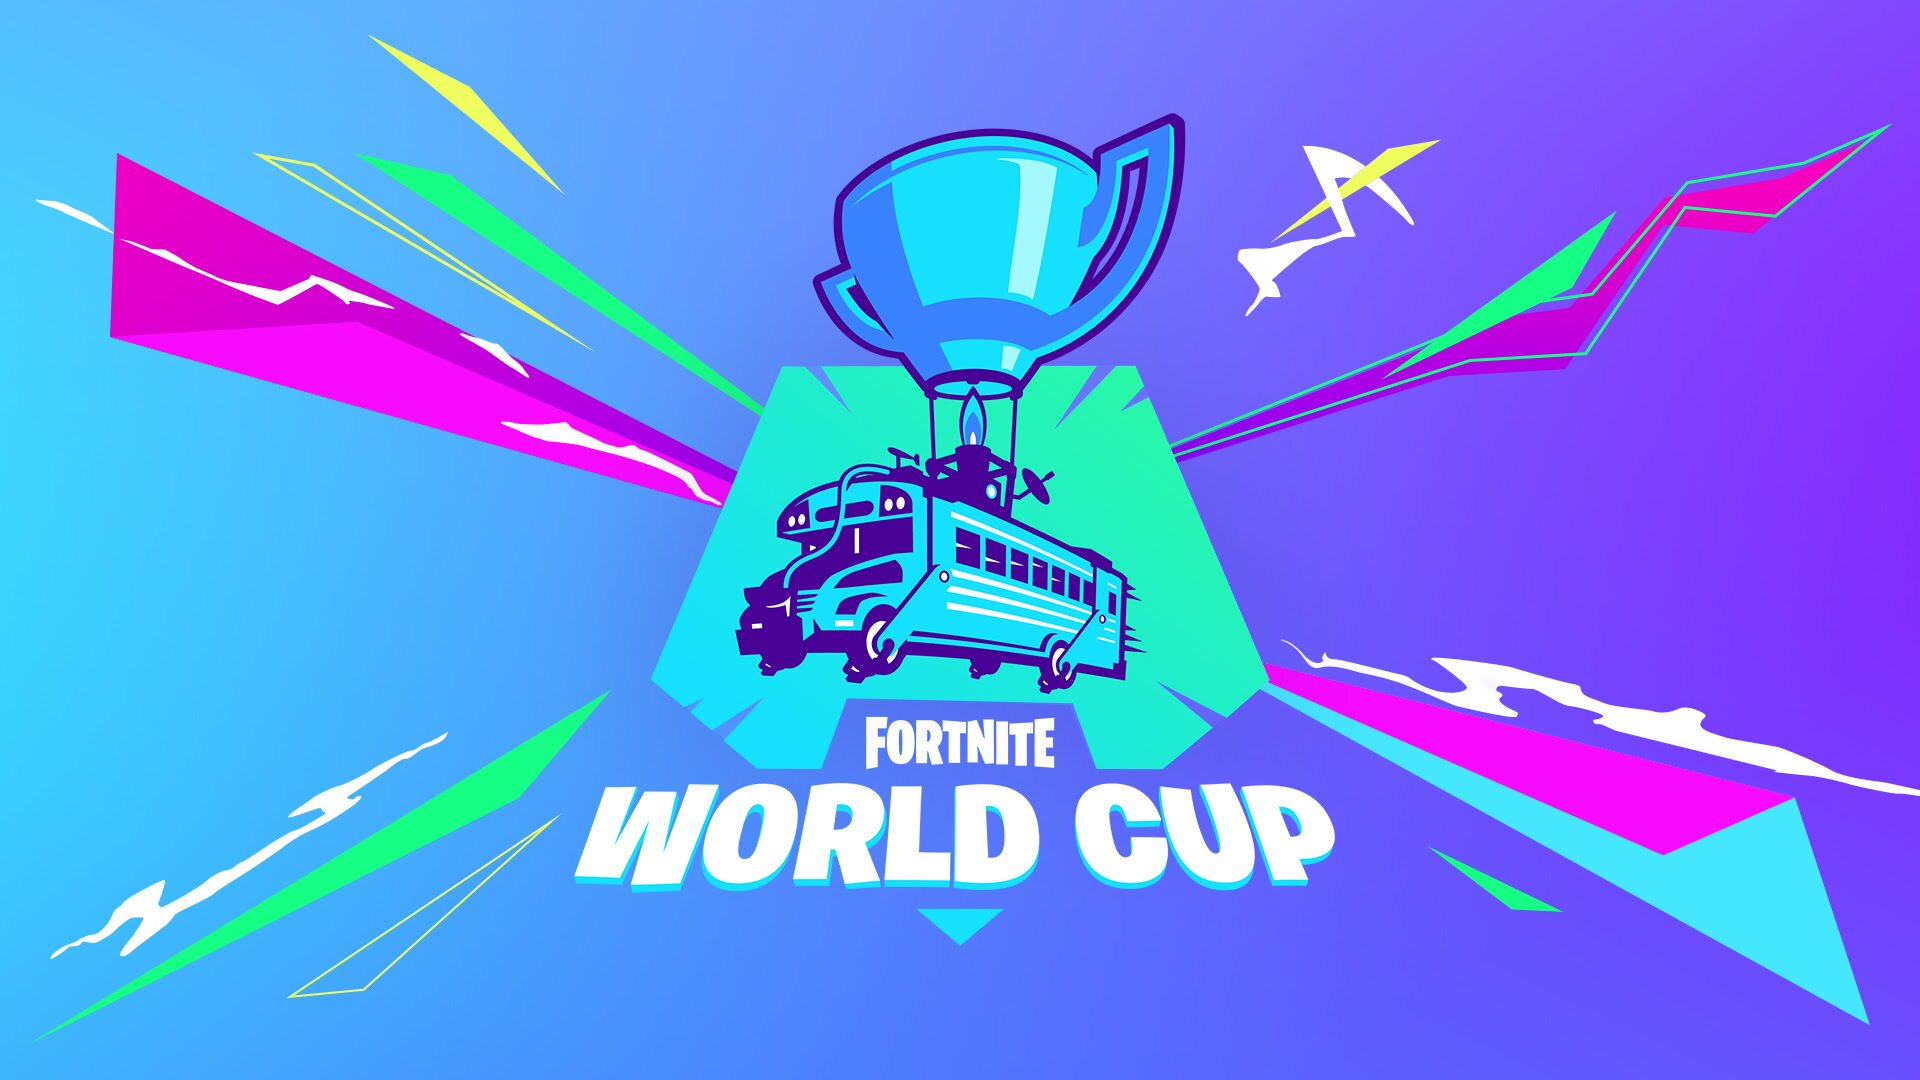 Online open qualifiers for the Fortnite World Cup will begin on April 13.